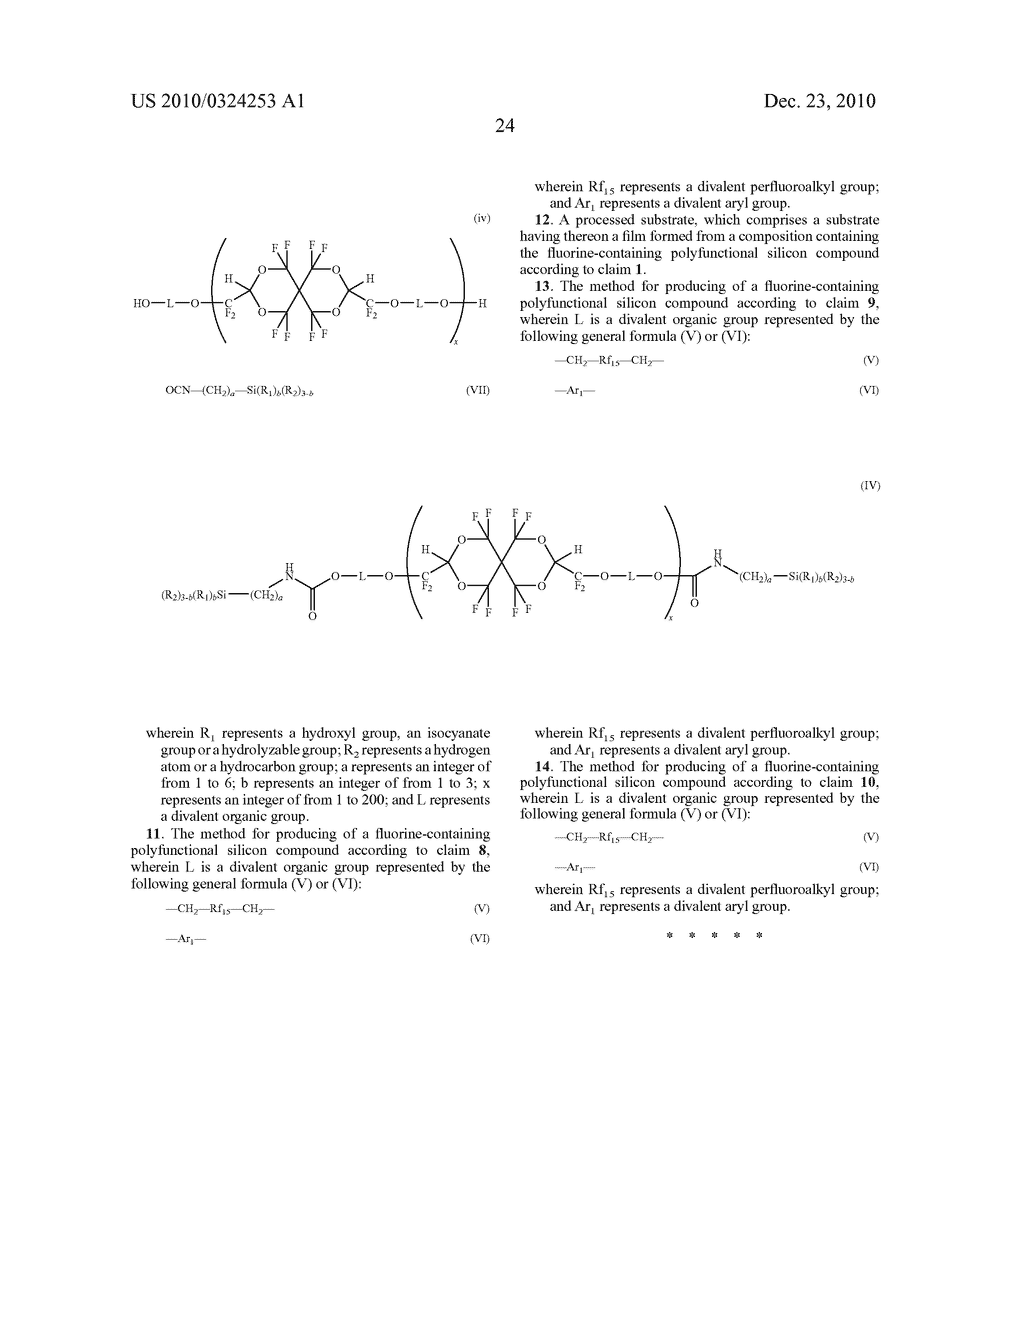 FLUORINE-CONTAINING POLYFUNCTIONAL SILICON COMPOUND AND METHOD FOR PRODUCING FLUORINE-CONTAINING POLYFUNCTIONAL SILICON COMPOUND - diagram, schematic, and image 25